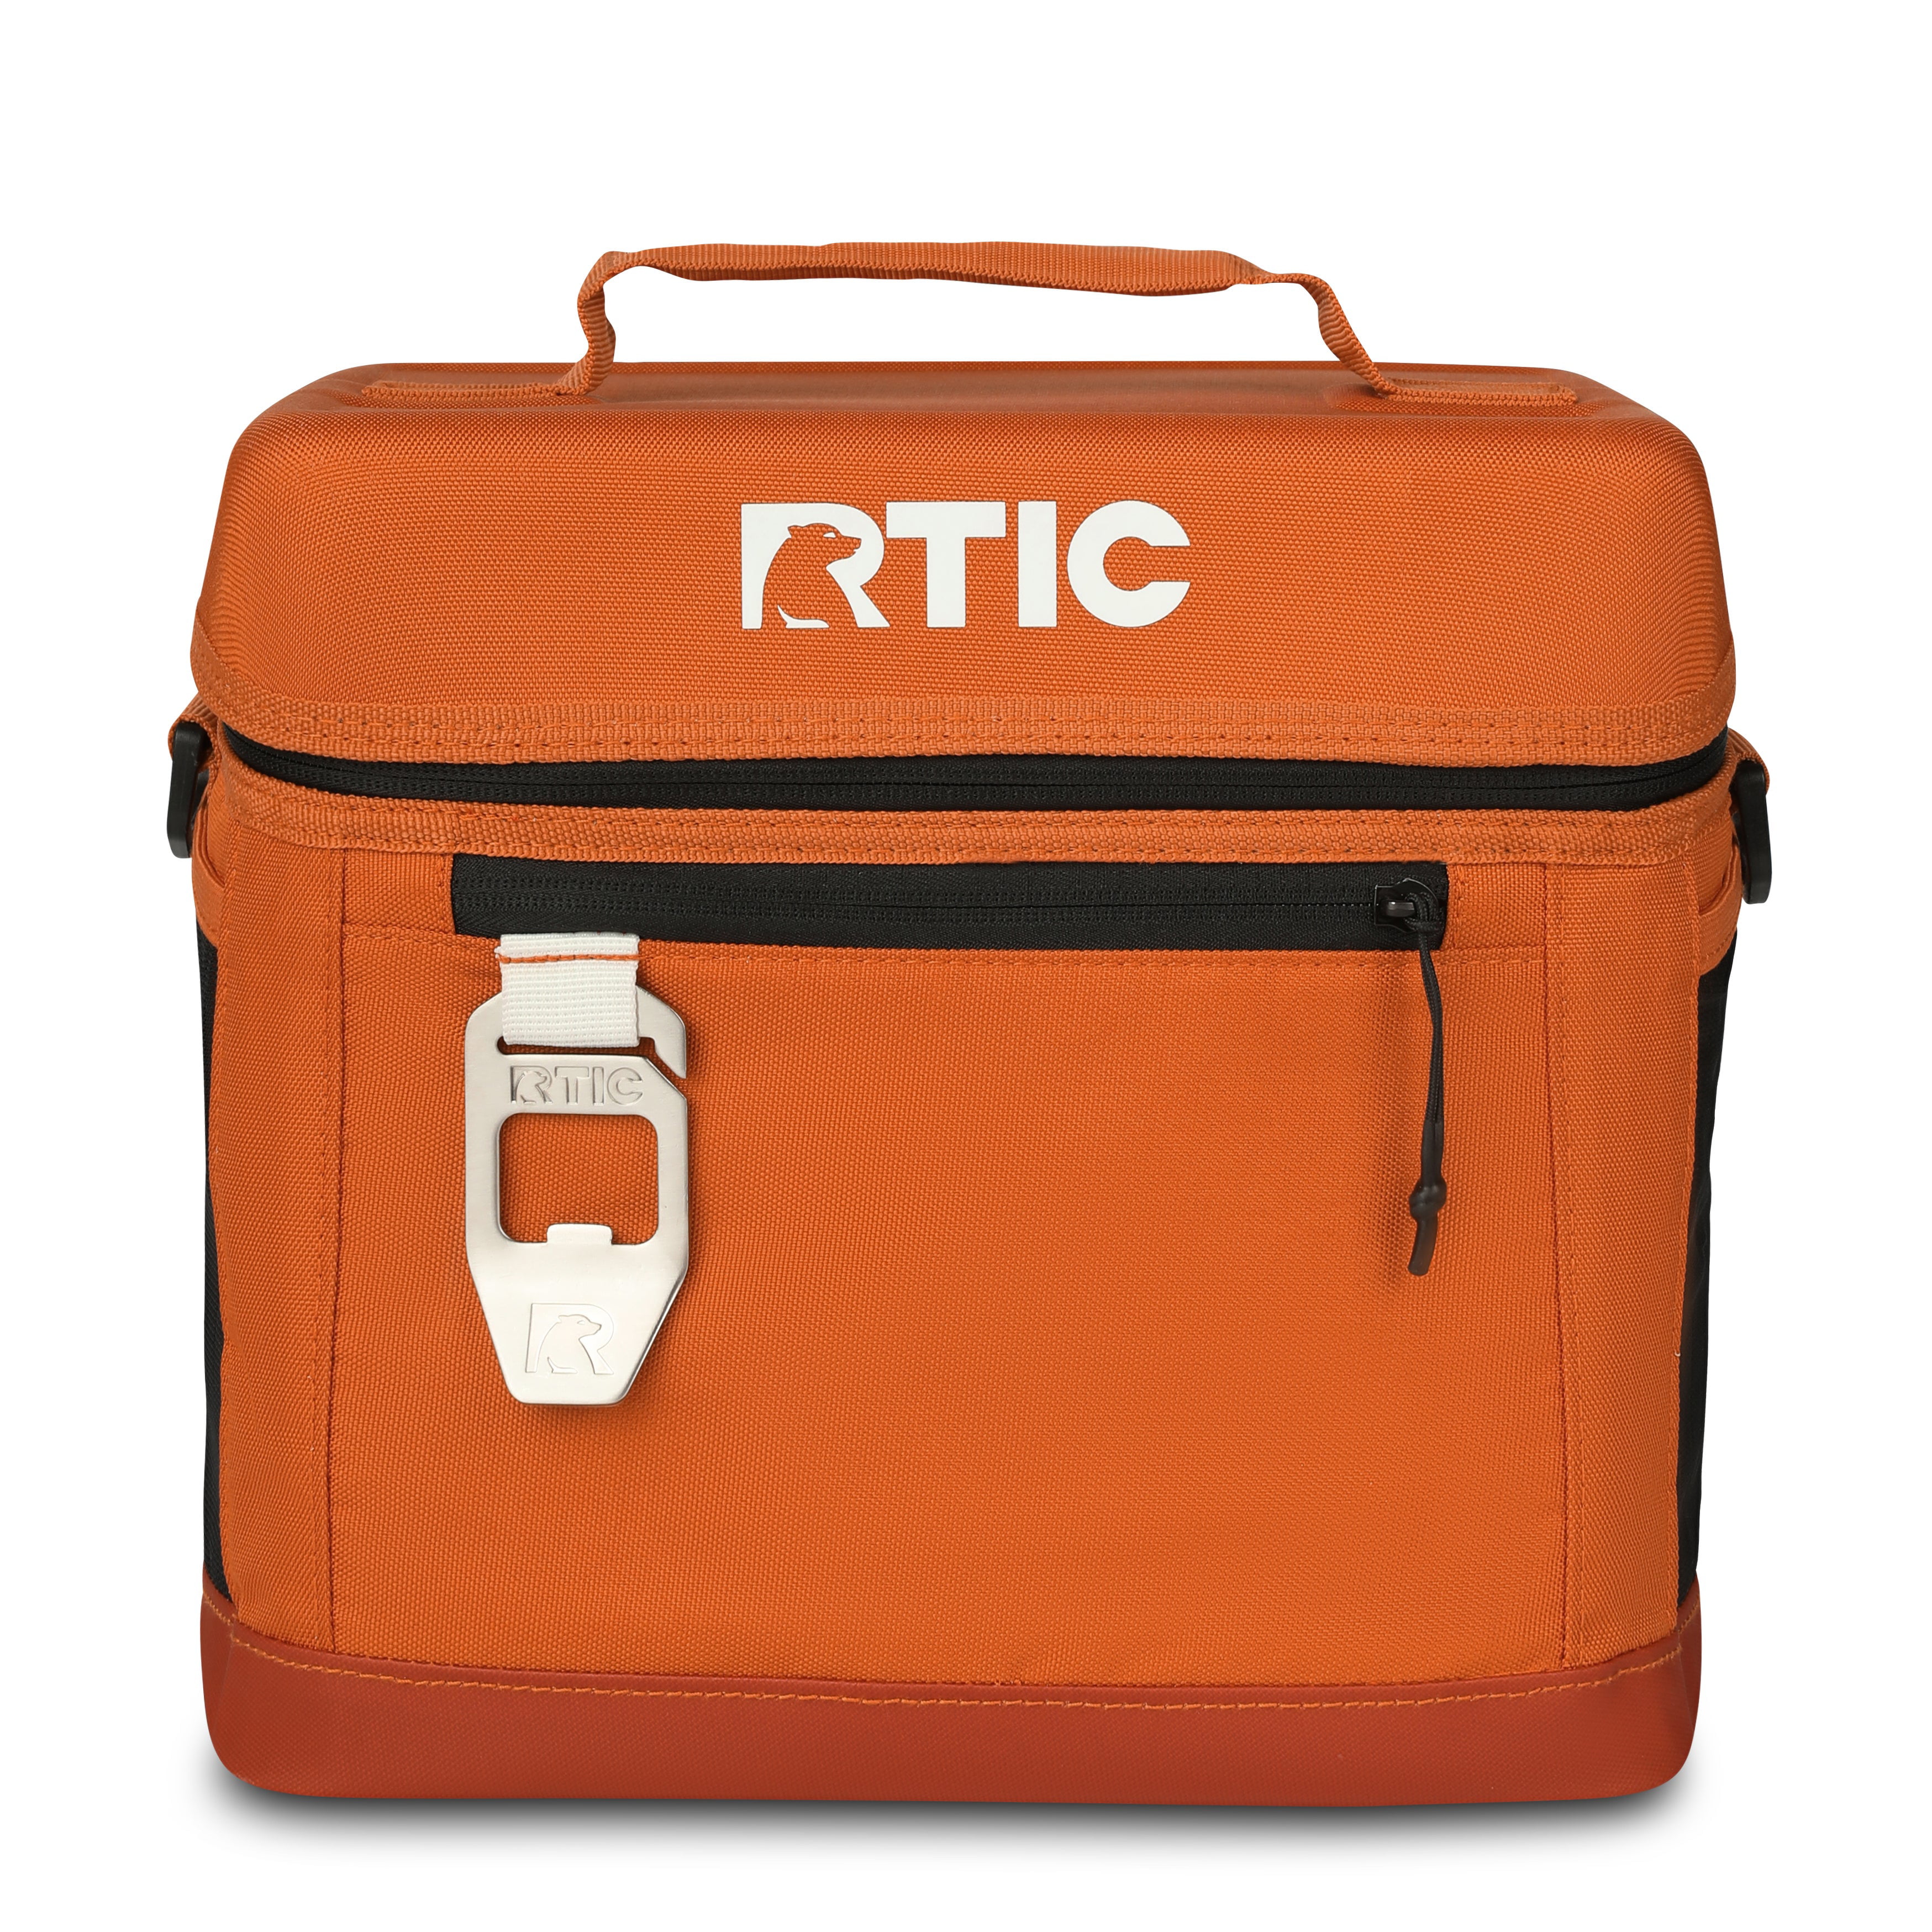 RTIC Day Cooler (Green, 15-Cans)–